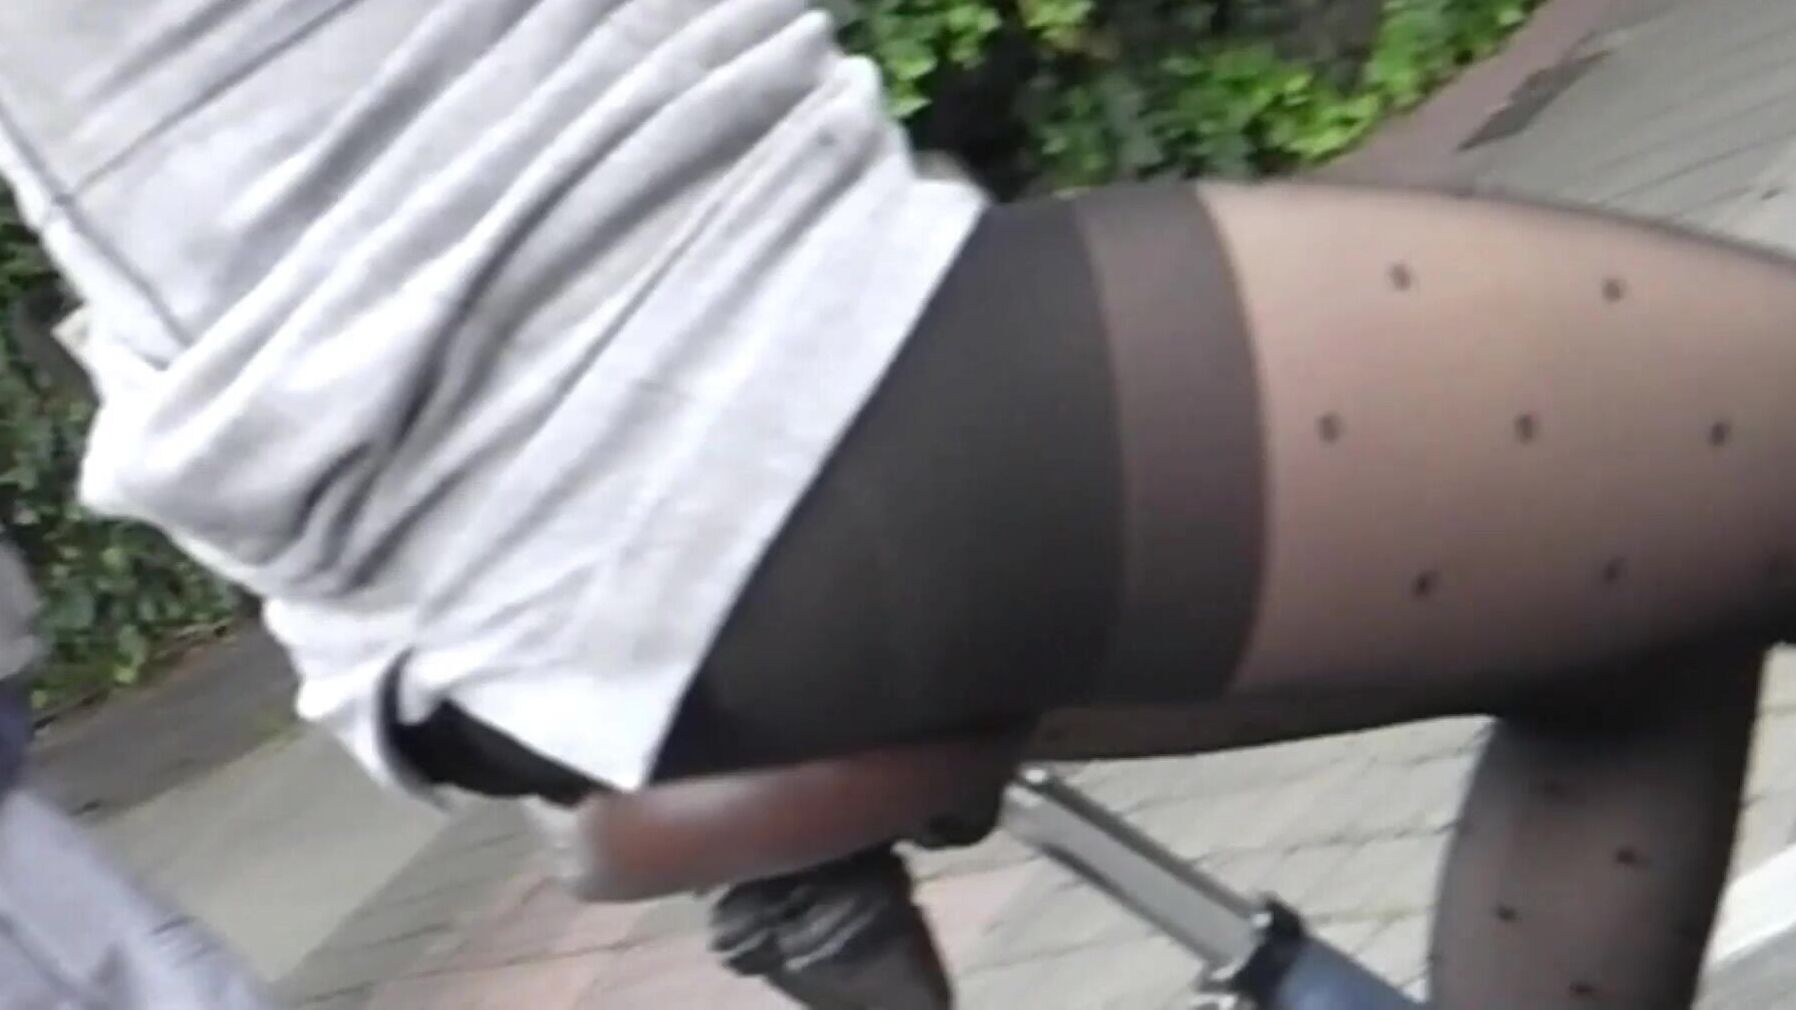 Skirt rides up compilation